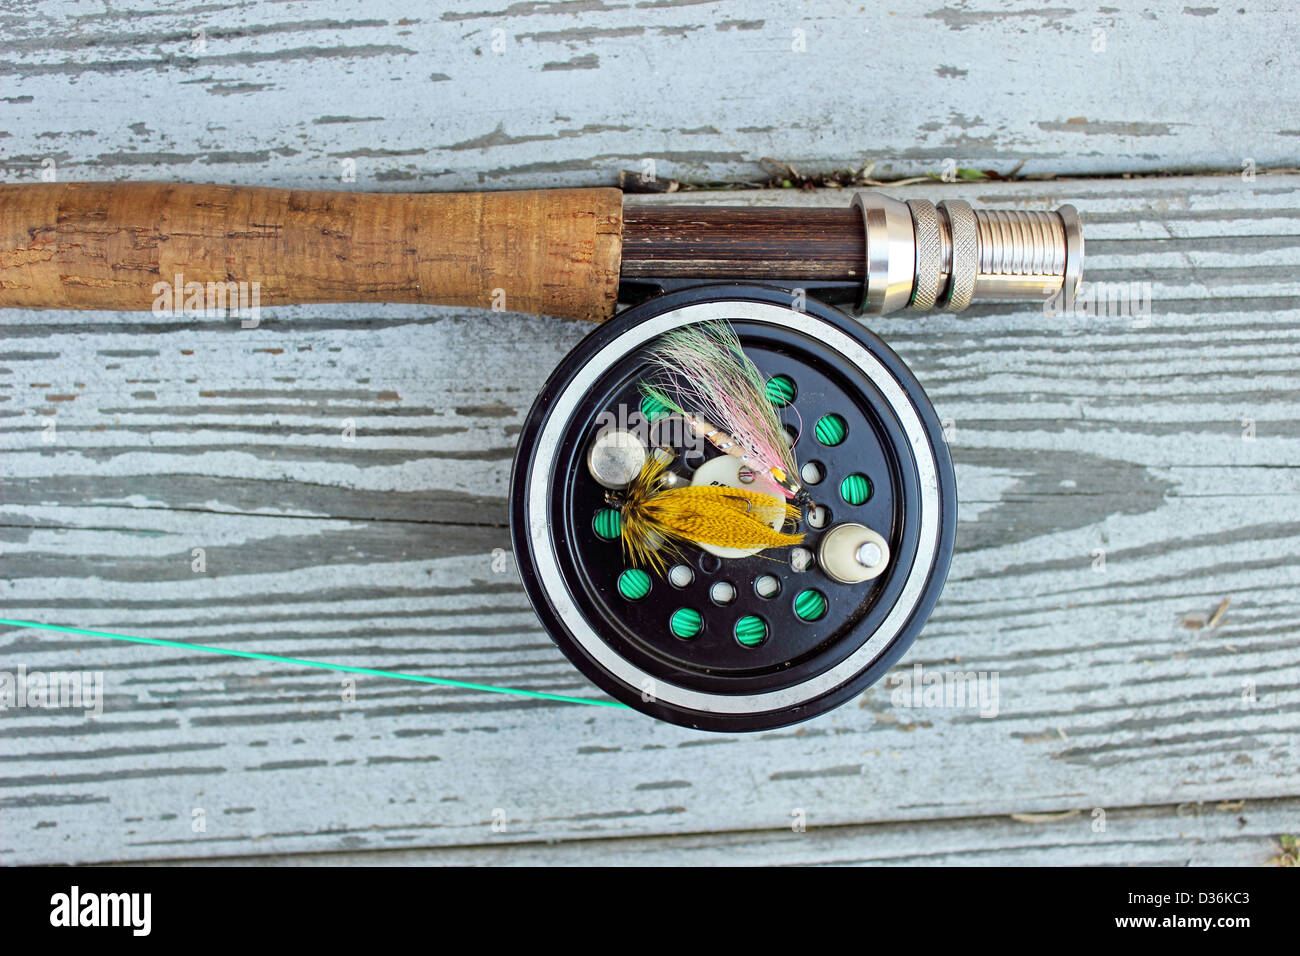 A flyrod and reel rests on a dock. Stock Photo